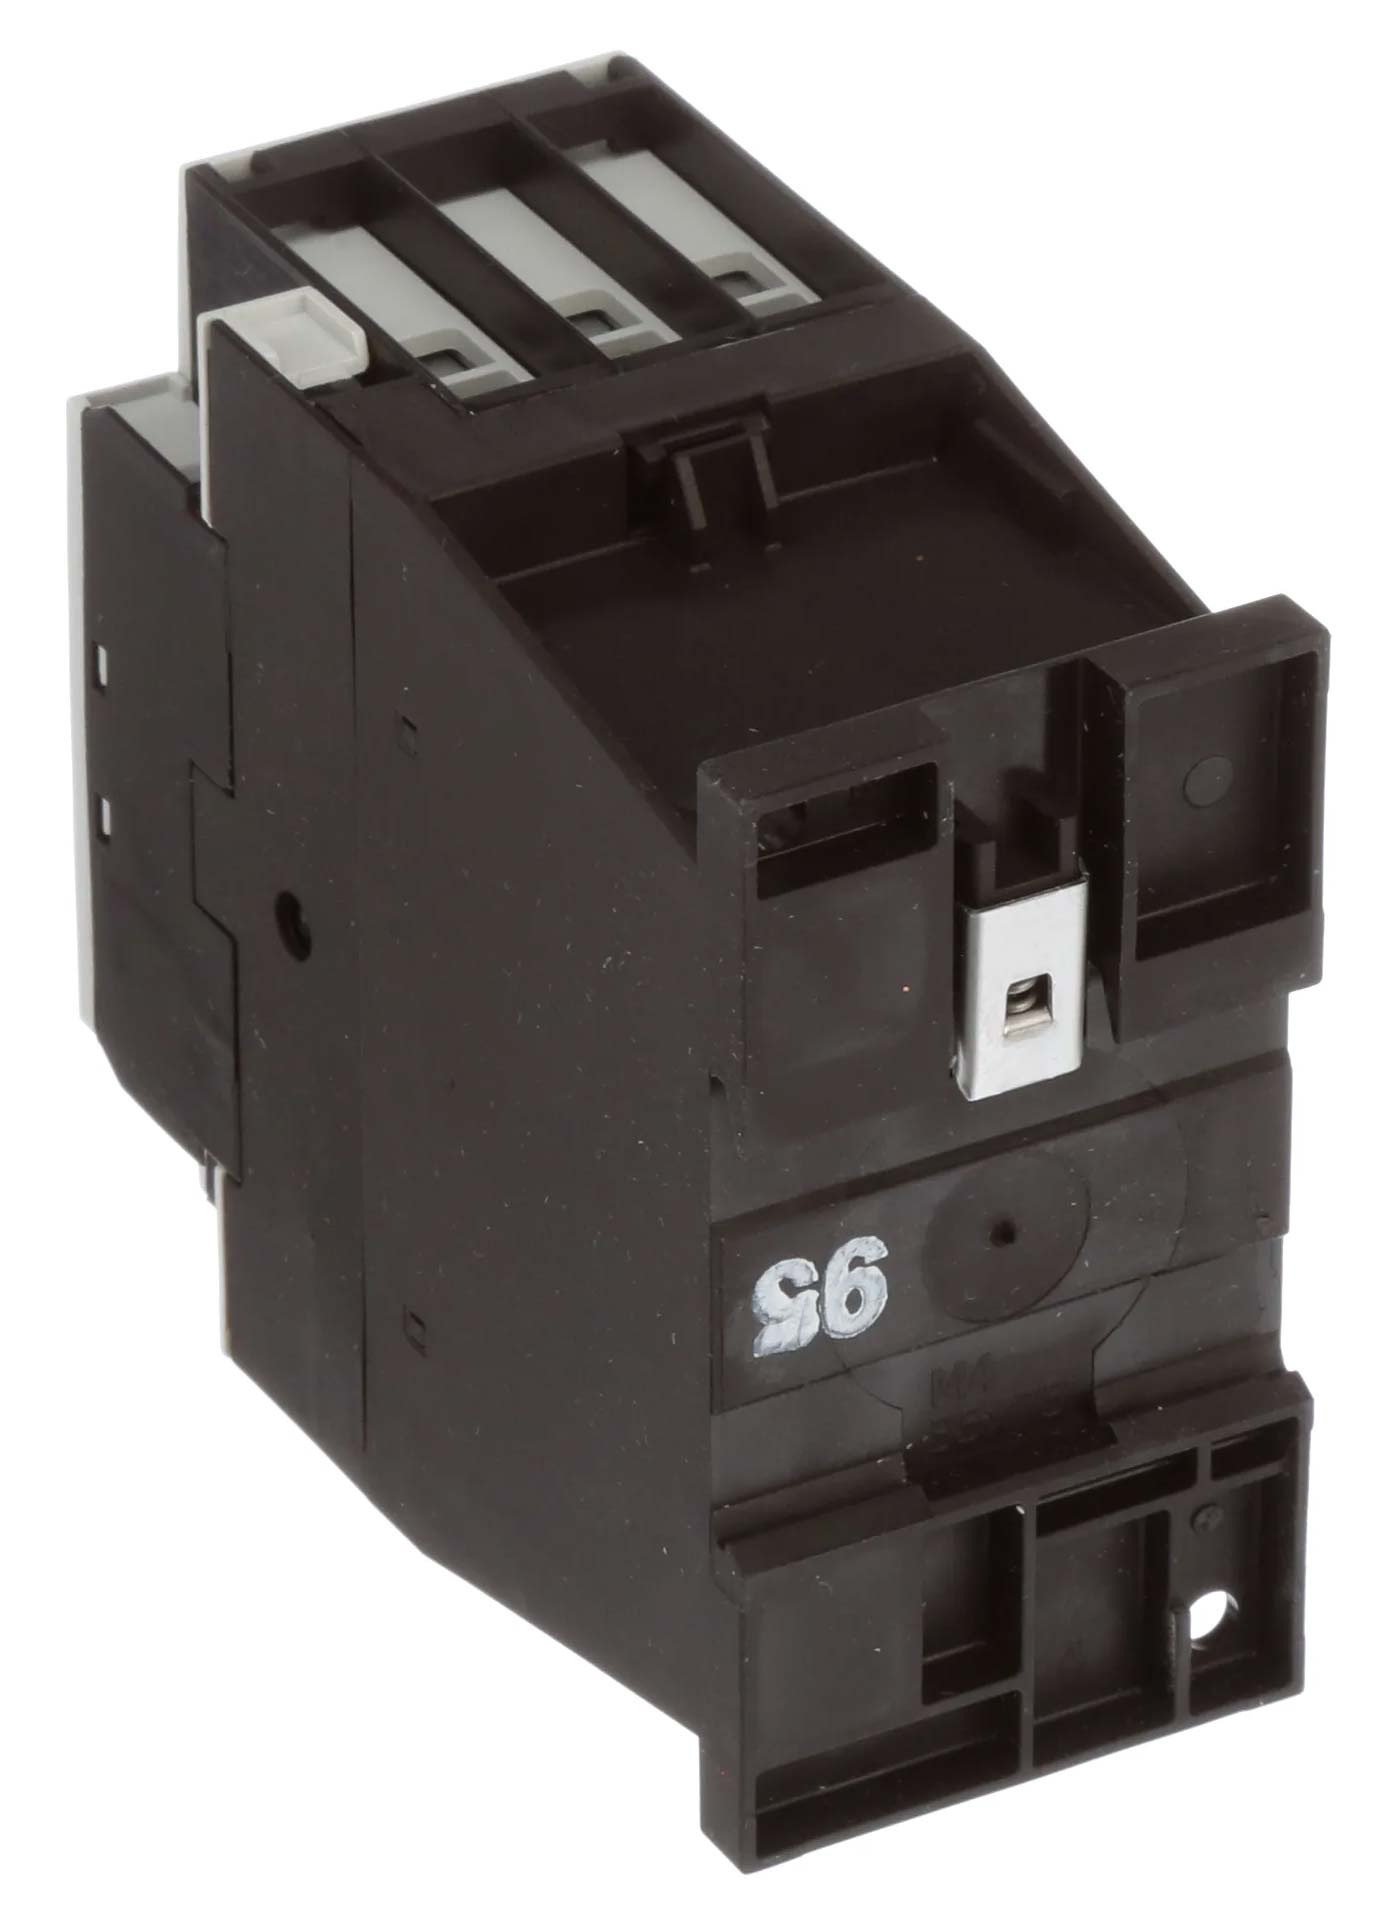 XTCE018C10A - Eaton - Magnetic Contactor